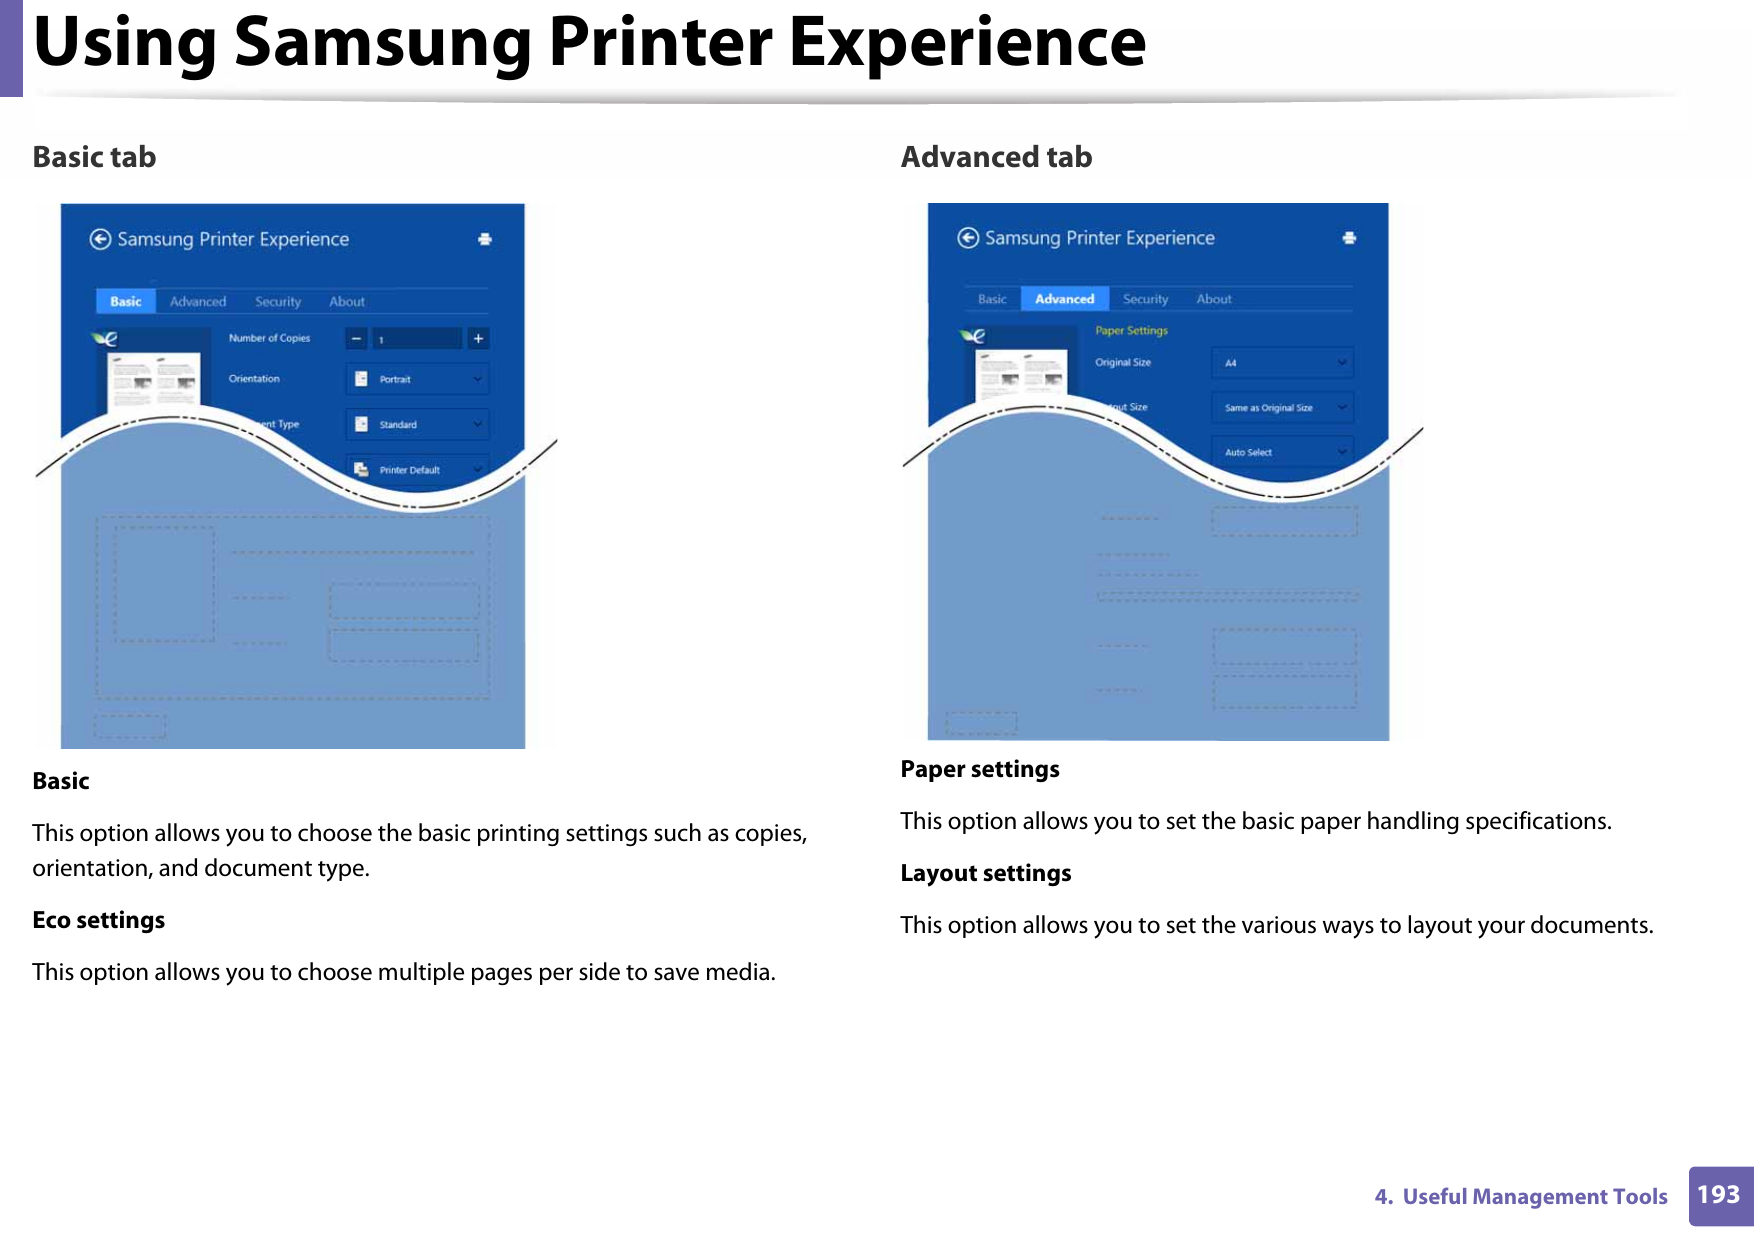 Using Samsung Printer Experience1934.  Useful Management ToolsBasic tabBasicThis option allows you to choose the basic printing settings such as copies, orientation, and document type.Eco settingsThis option allows you to choose multiple pages per side to save media.Advanced tabPaper settingsThis option allows you to set the basic paper handling specifications.Layout settingsThis option allows you to set the various ways to layout your documents.